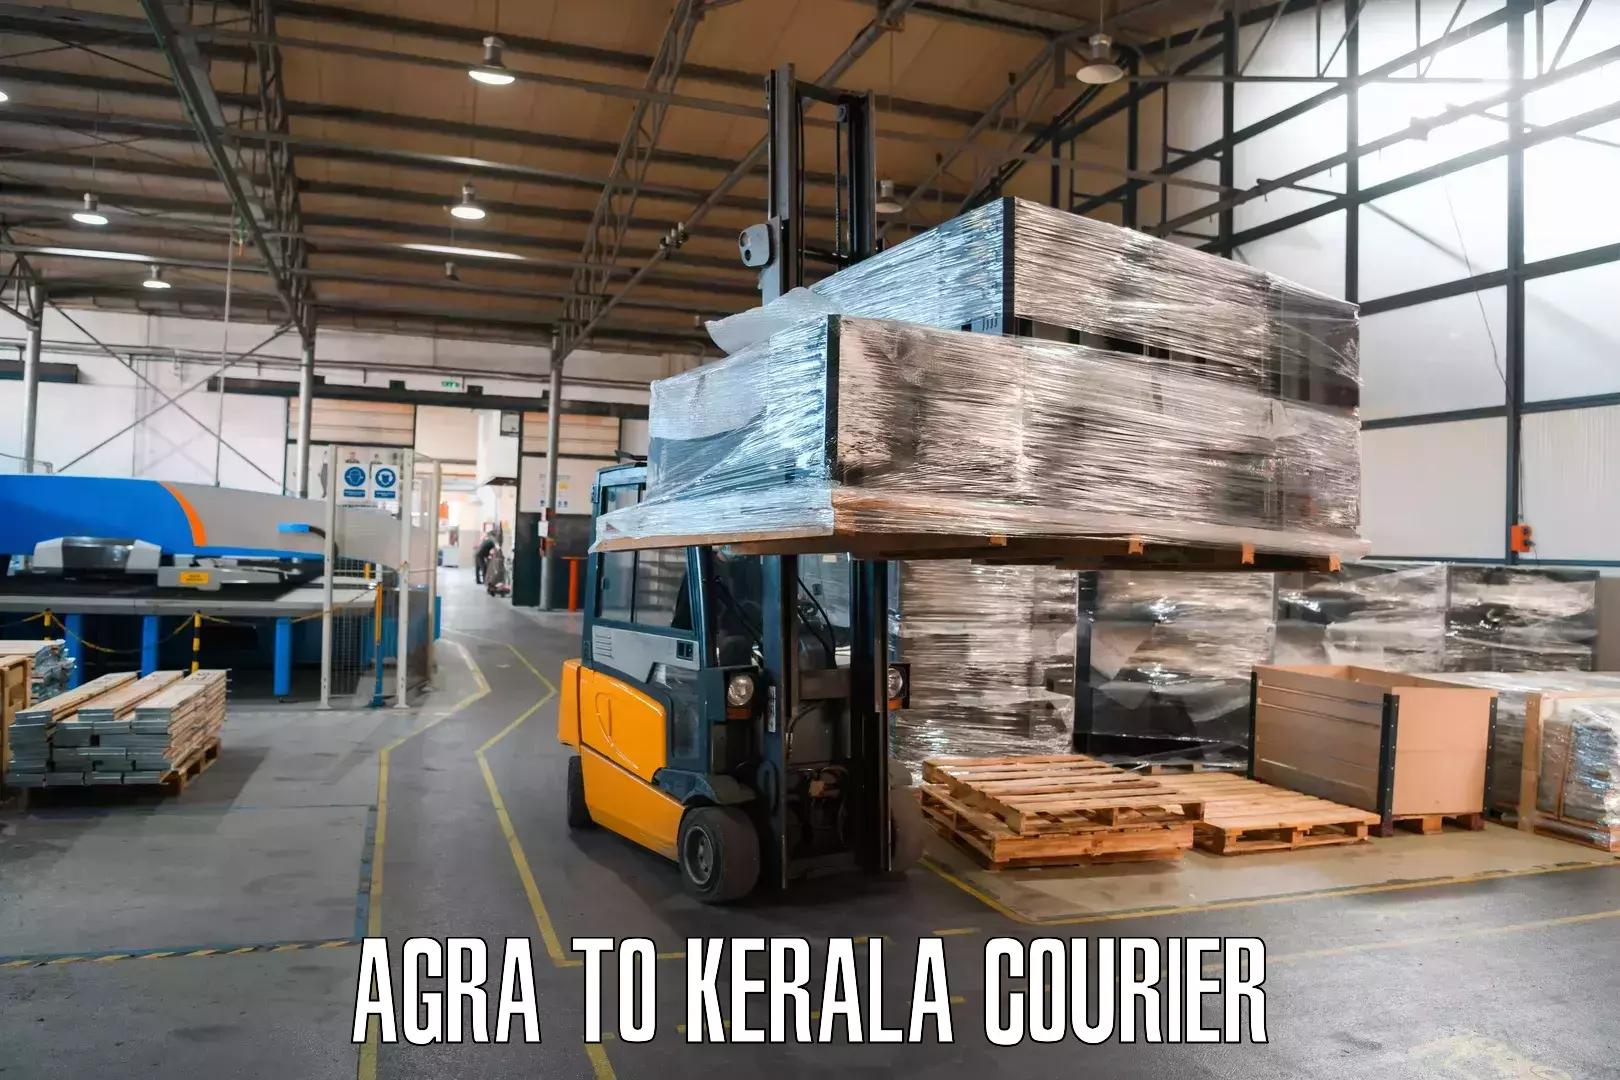 Residential courier service Agra to Kollam